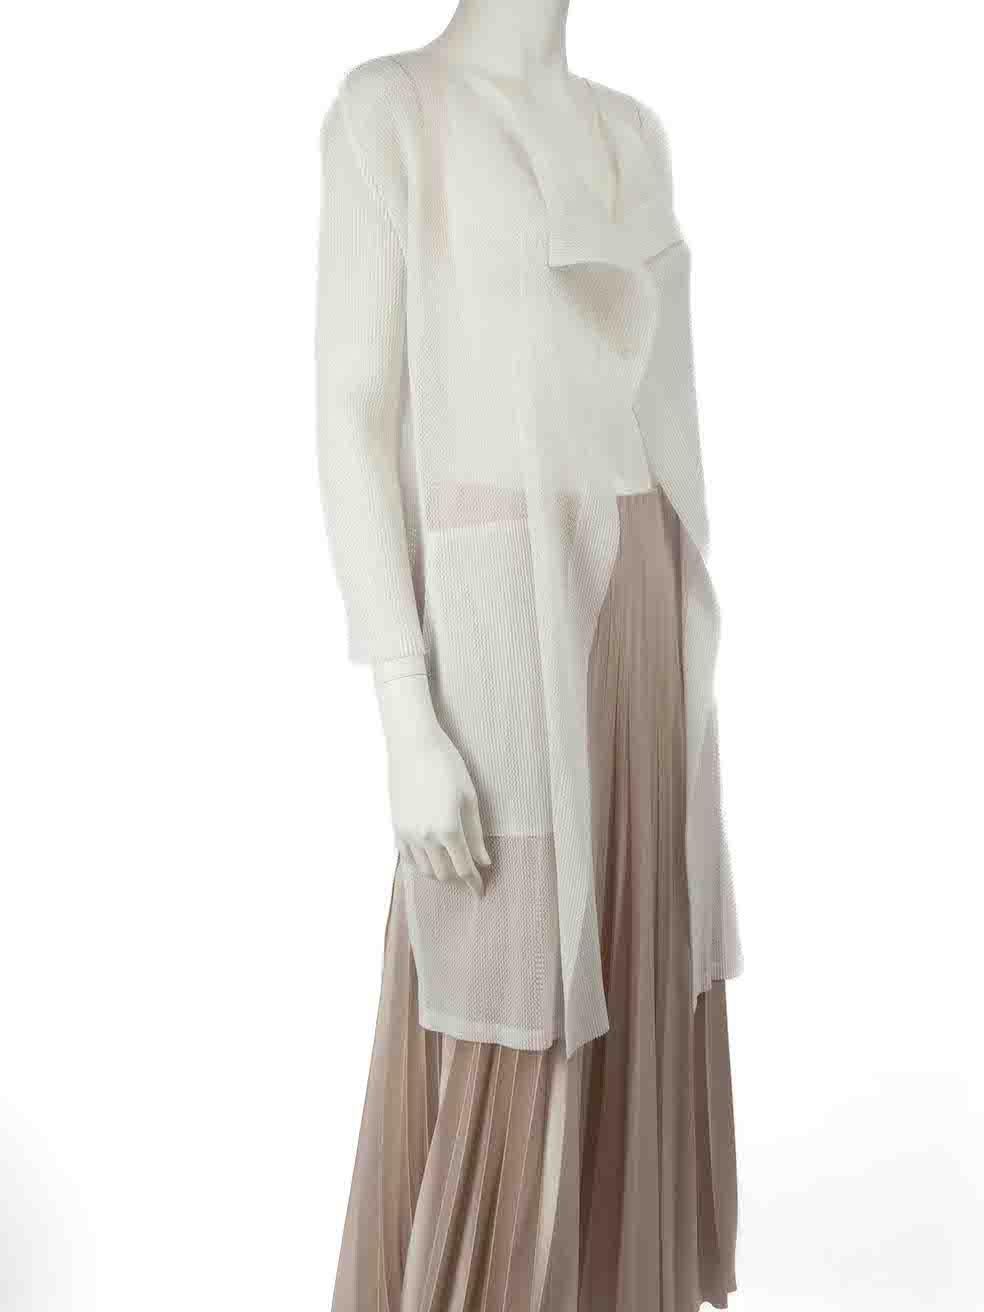 CONDITION is Very good. Minimal wear to cardigan is evident. Minimal wear to the centre-front with light mark on this used Issey Miyake Pleats Please designer resale item.
 
 Details
 White
 Polyester
 Mid length cardigan
 Mesh texture
 See through
